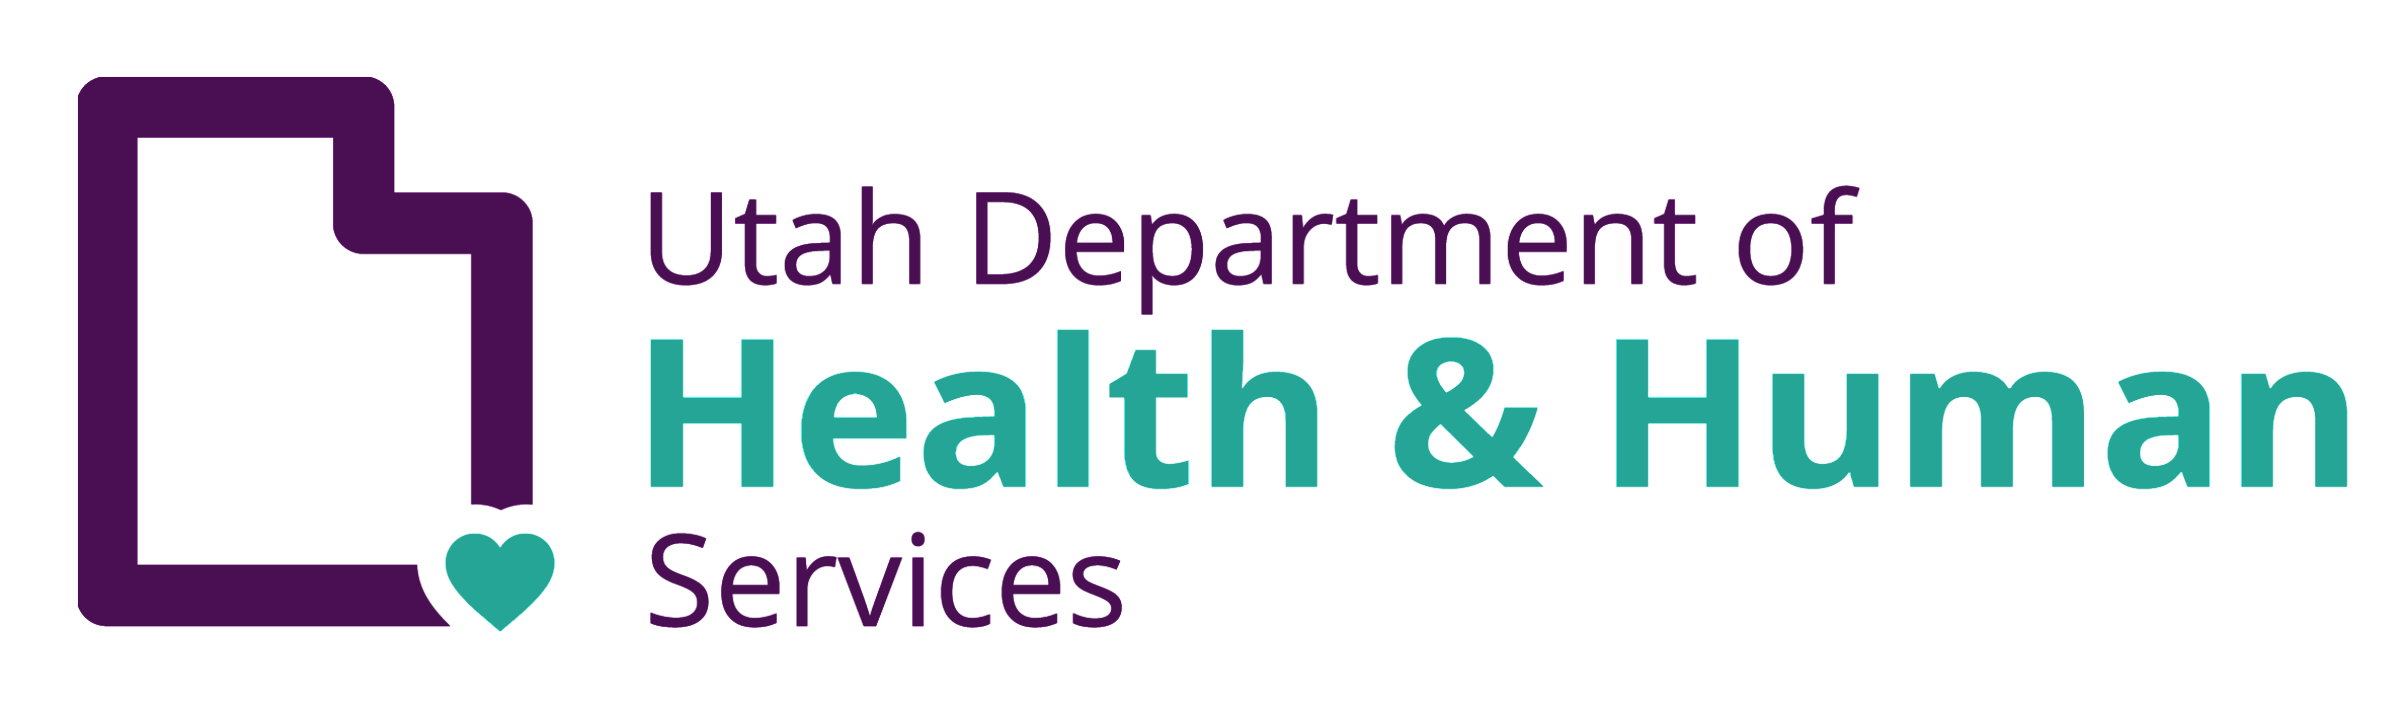 Utah Department of Health and Human Services vertical logo